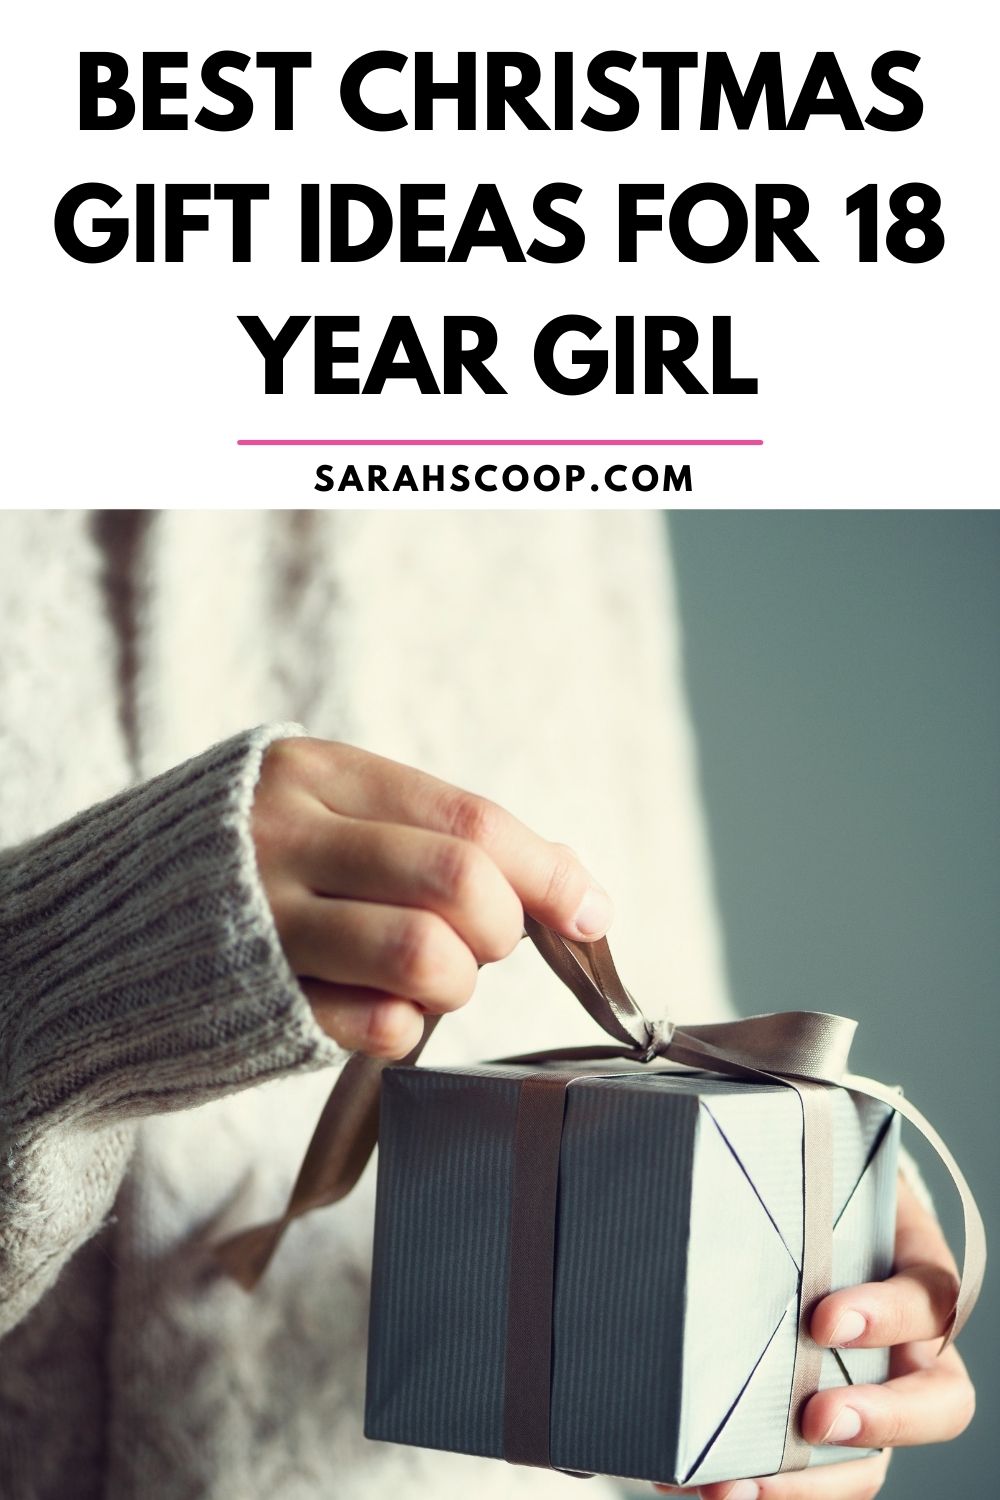 14 Amazing Gift Ideas for Your Teen Girls - City Girl Gone Mom